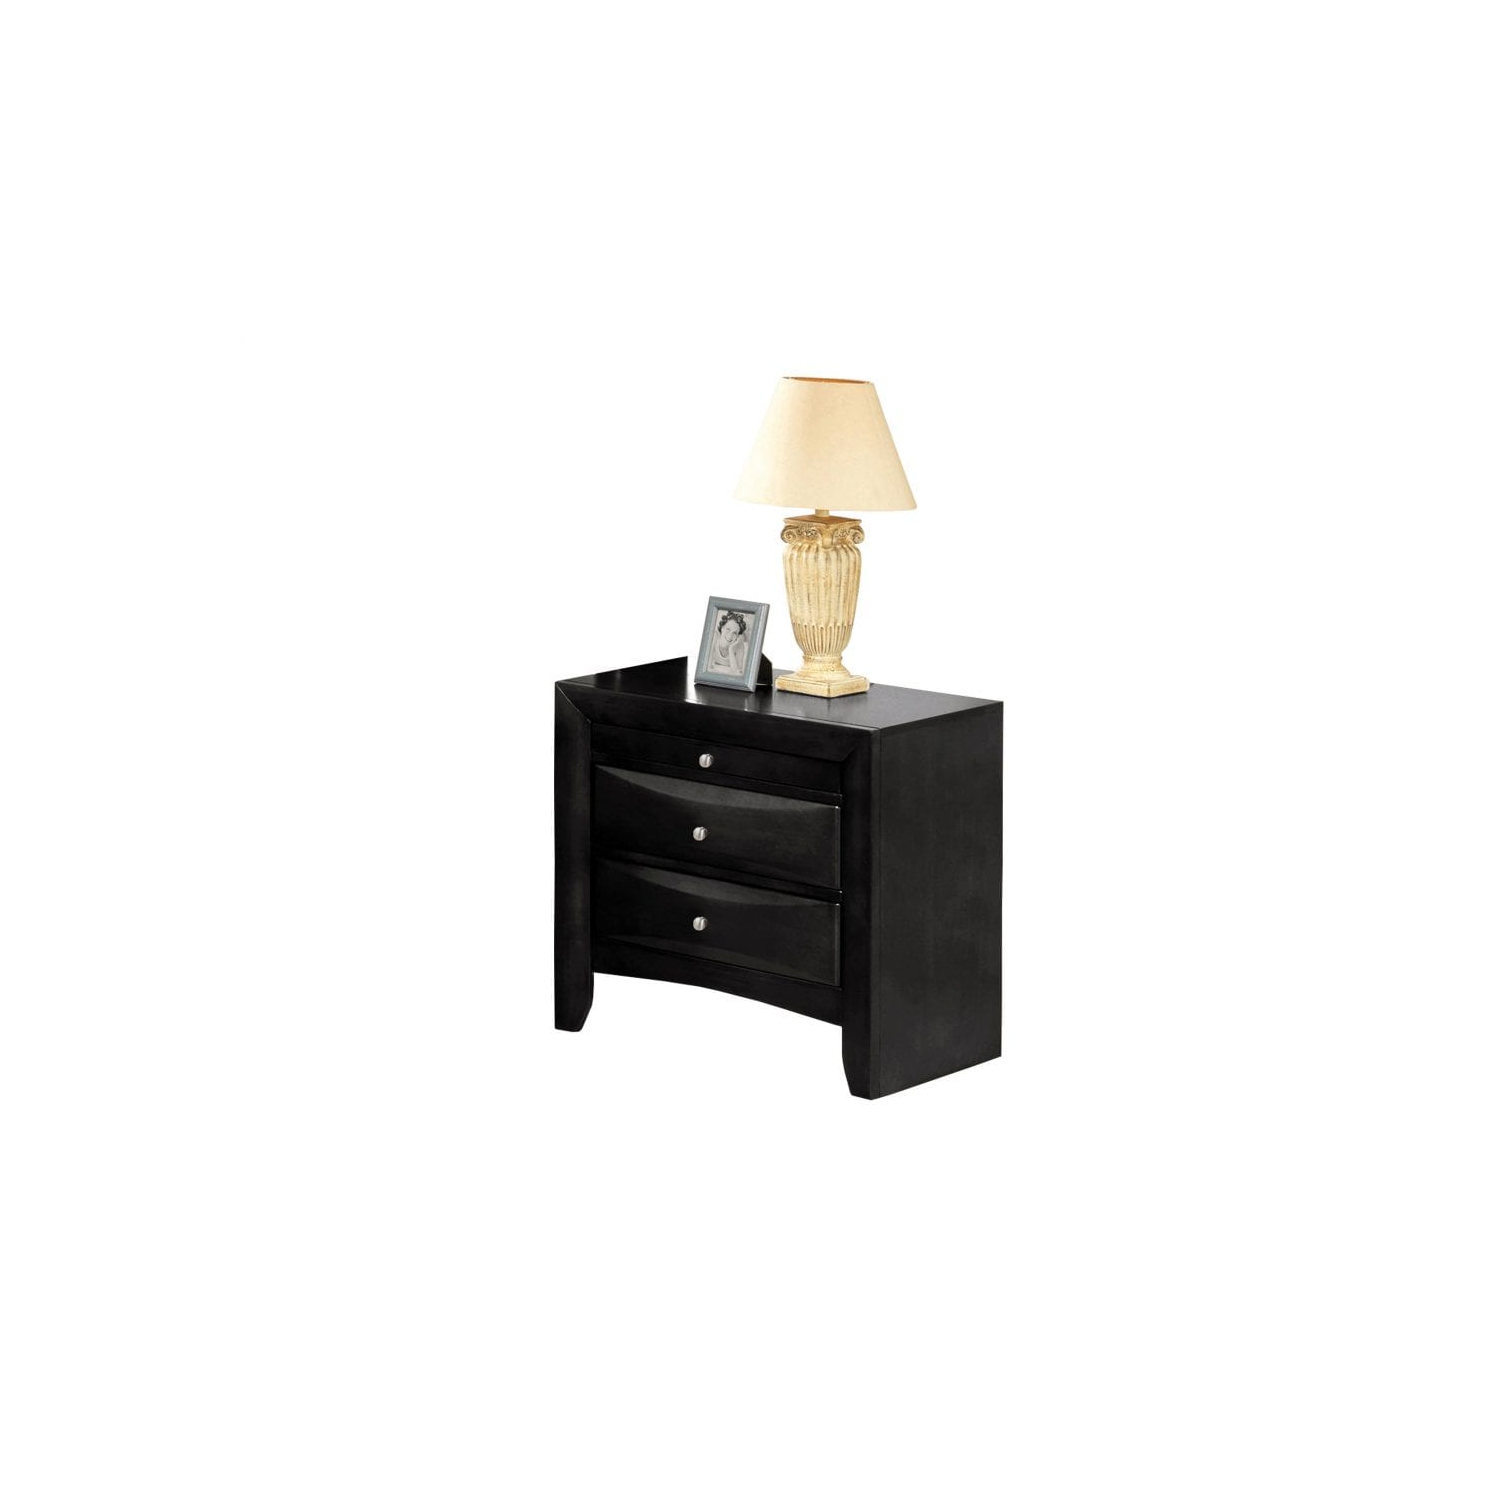 Felicia Black Wood Finish Traditional Bedroom Night Stand with 3 Drawers